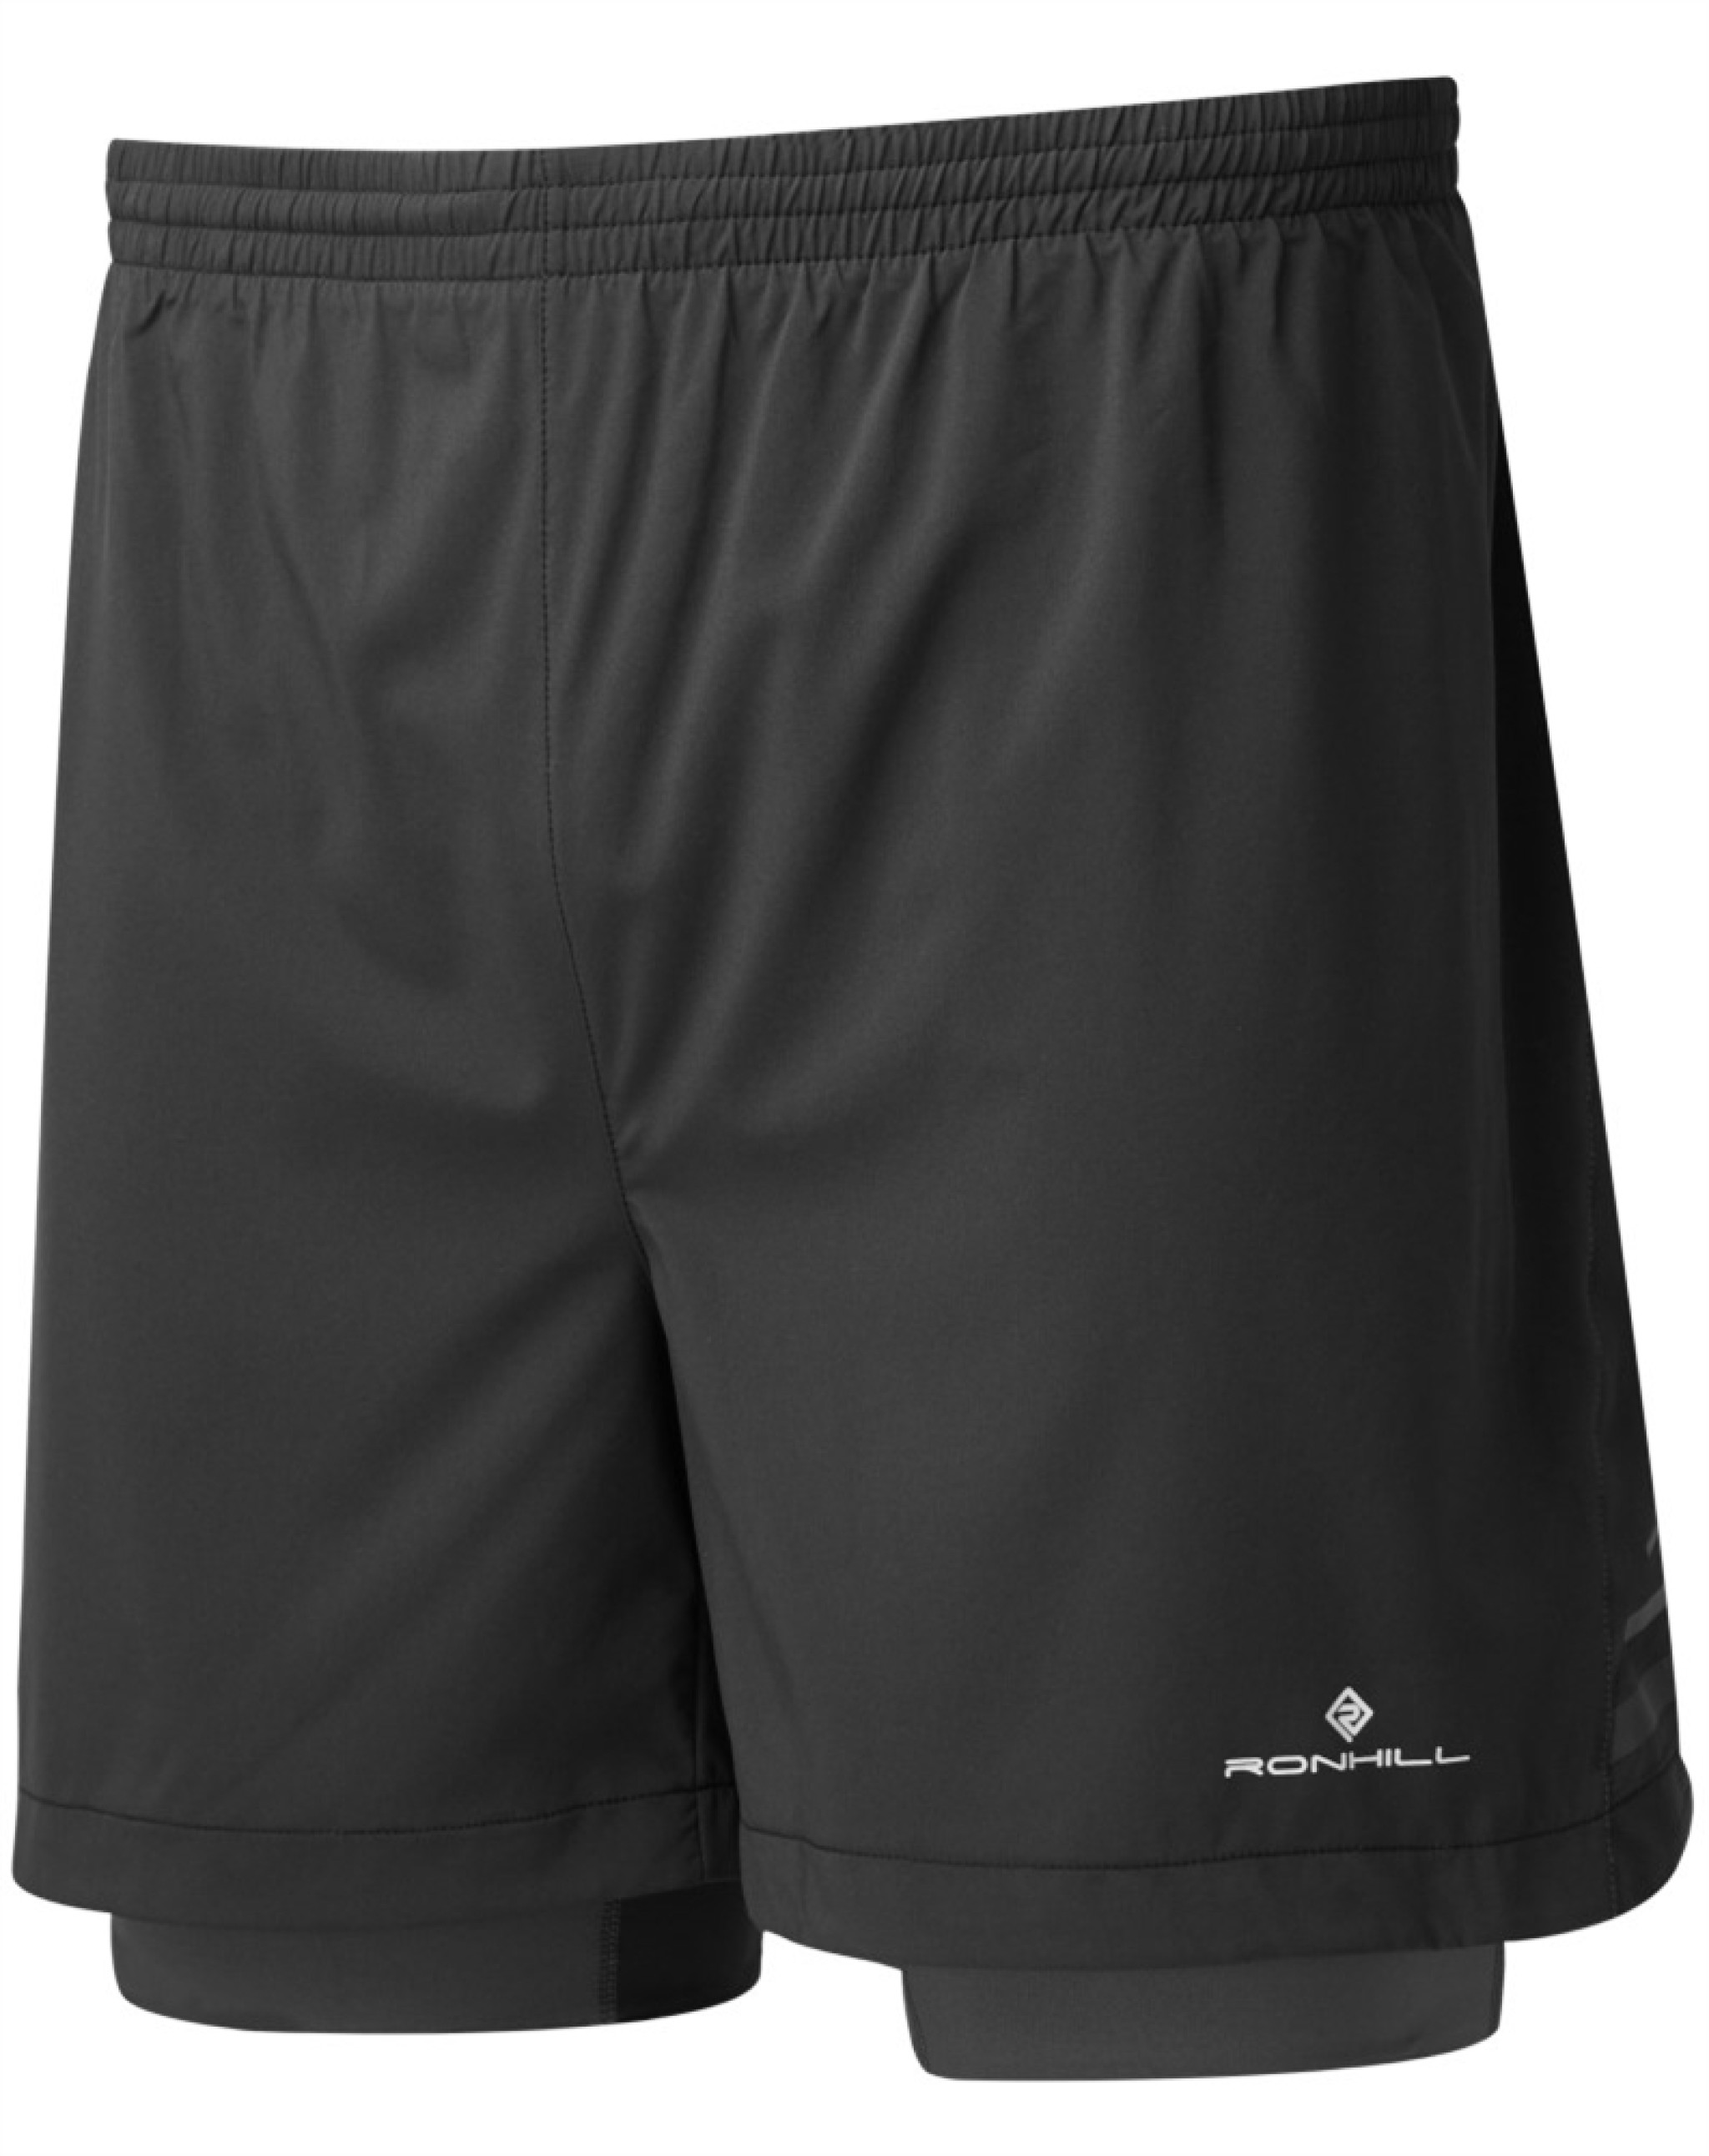 RONHILL Mens STRIDE CARGO Sports Running SHORTS with Rear Security & Gel Pockets 